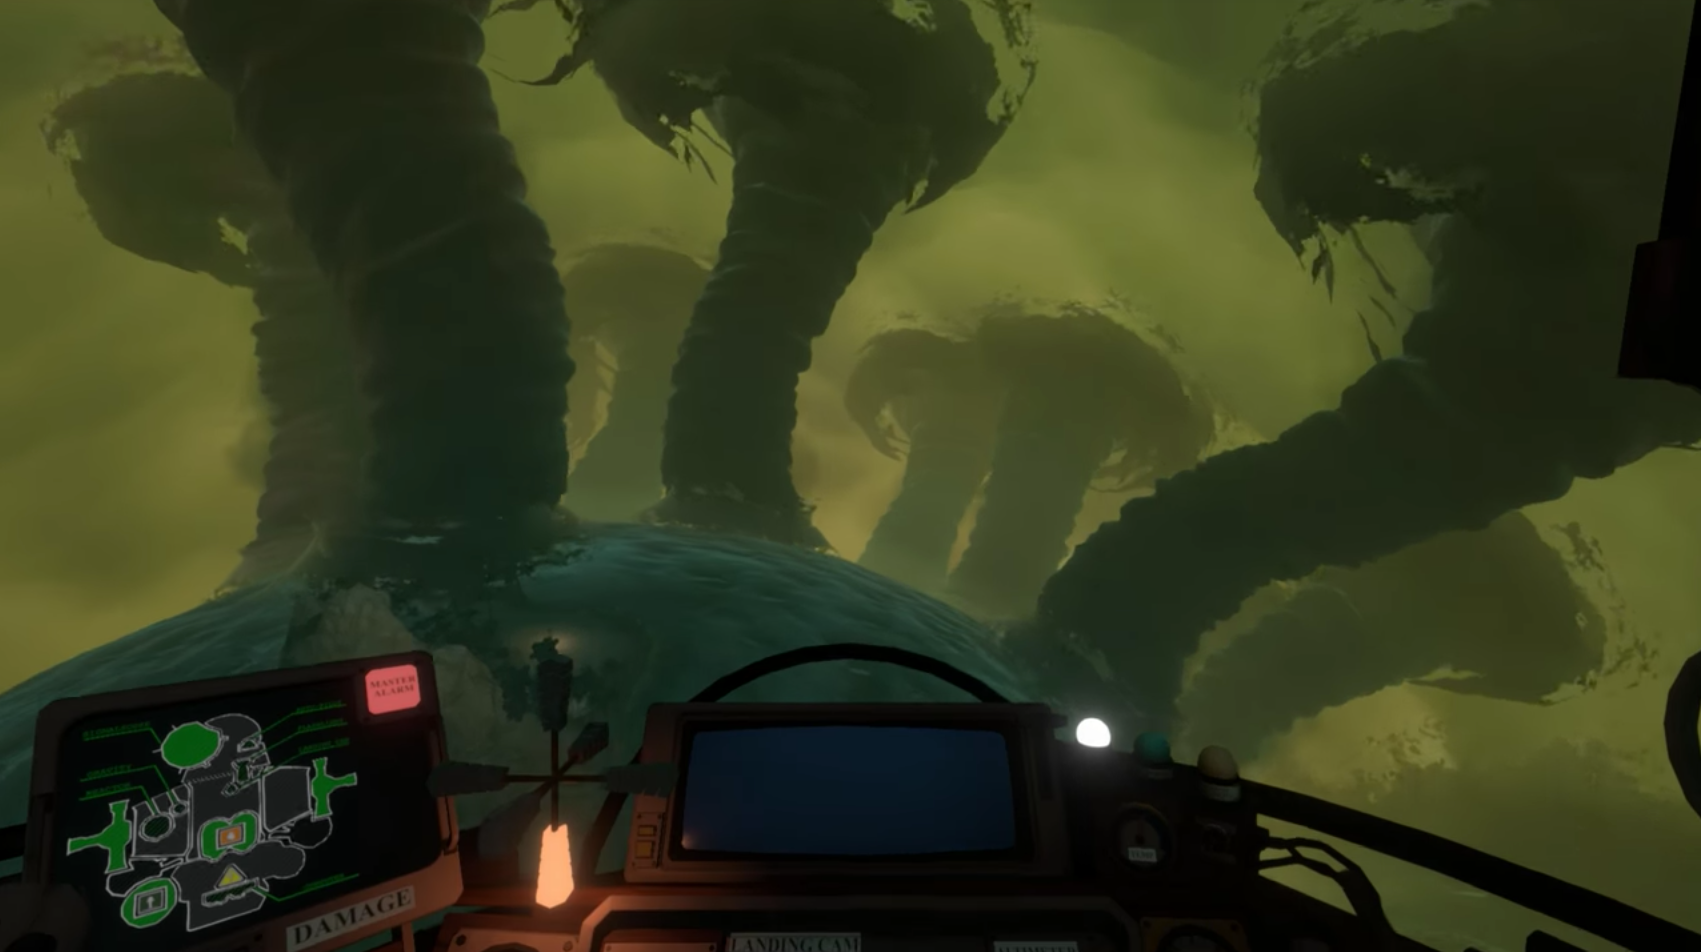 Outer Wilds Mods - Find the best mods for Outer Wilds - Full list of mods  for Outer Wilds. Including mods for VR, multiplayer, and cheats.